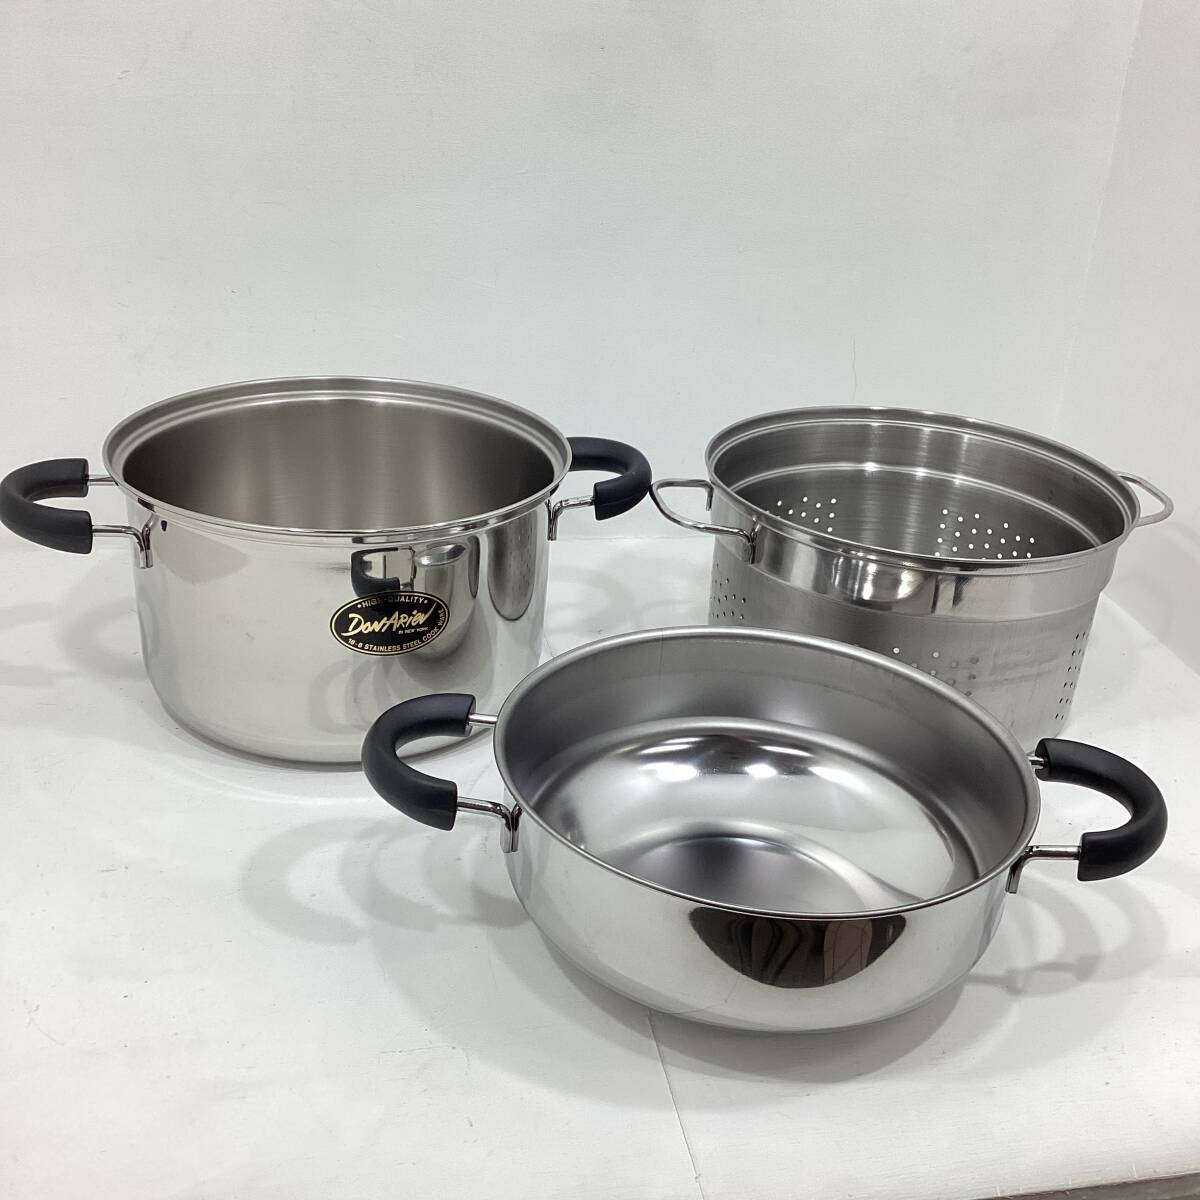 [ unused ] Don *a rib 18-8 stainless steel made dome pasta 22cm 5.3L middle basket cover attaching deep saucepan kitchen tool cookware (H818)